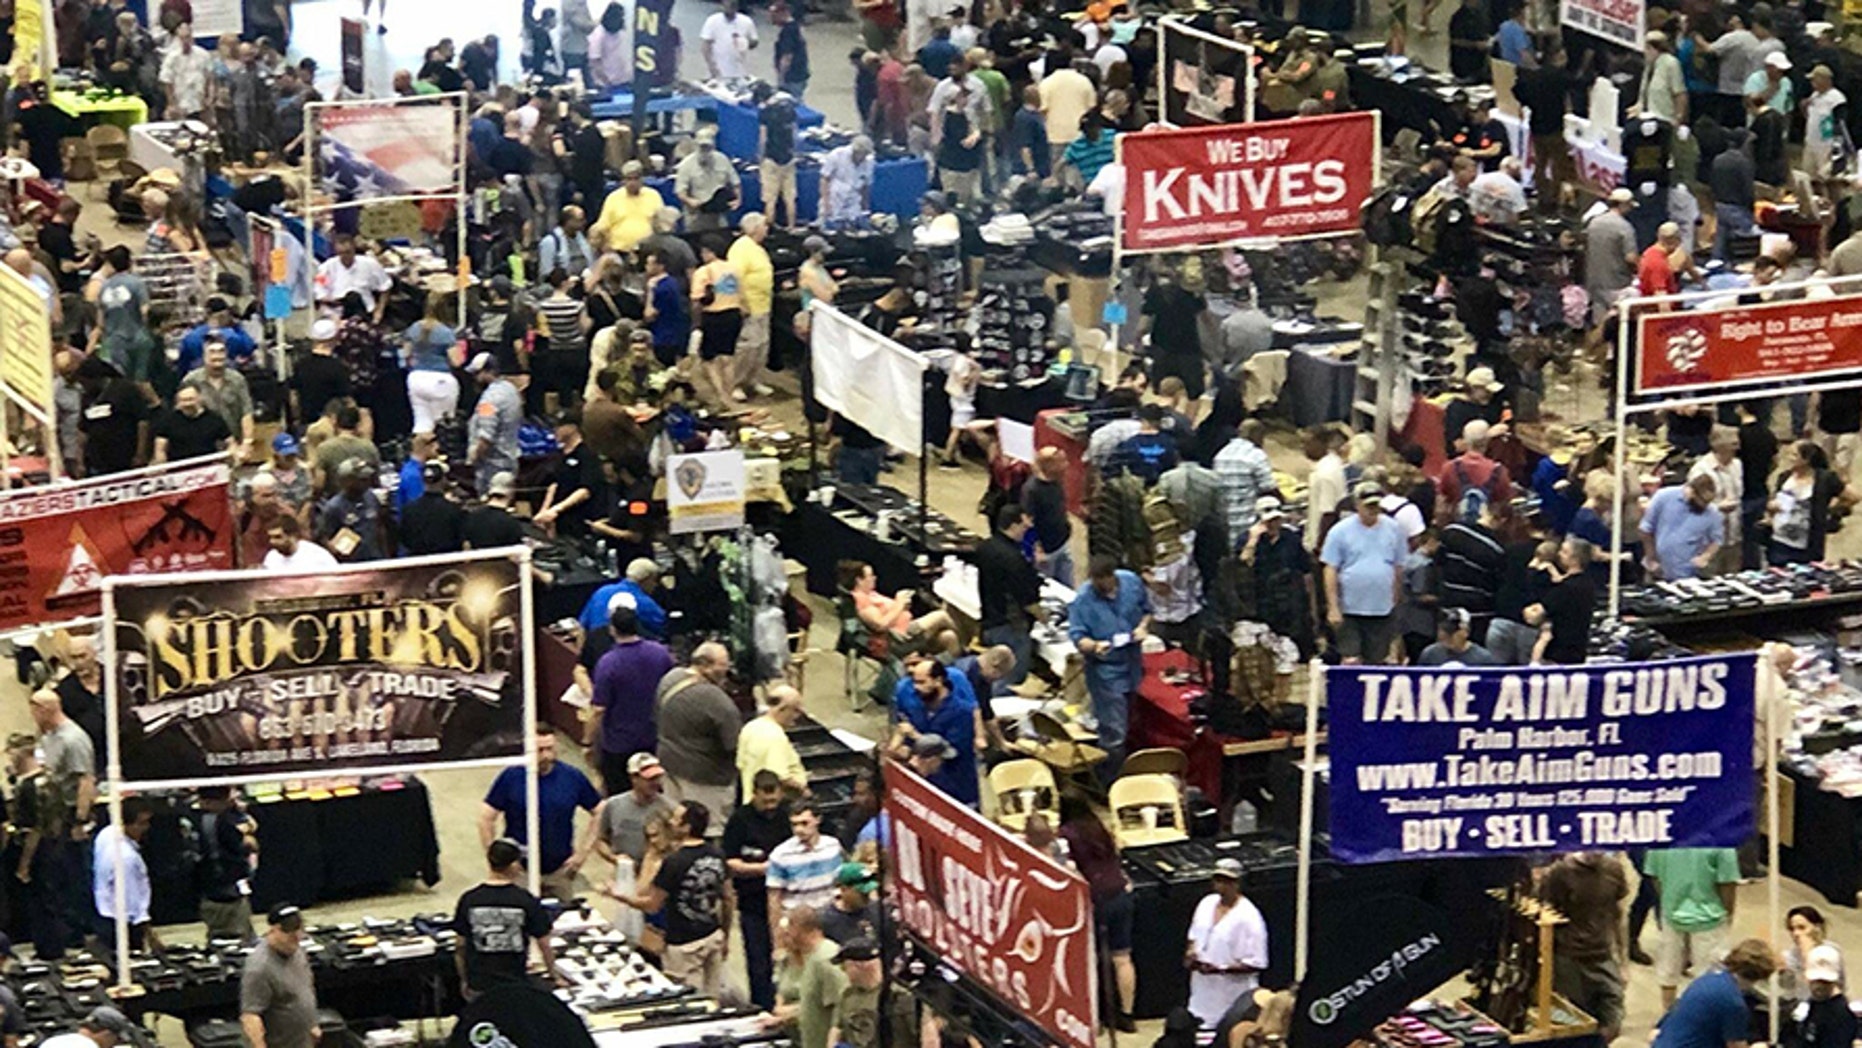 Florida gun show sees 'record number' after Parkland school shooting